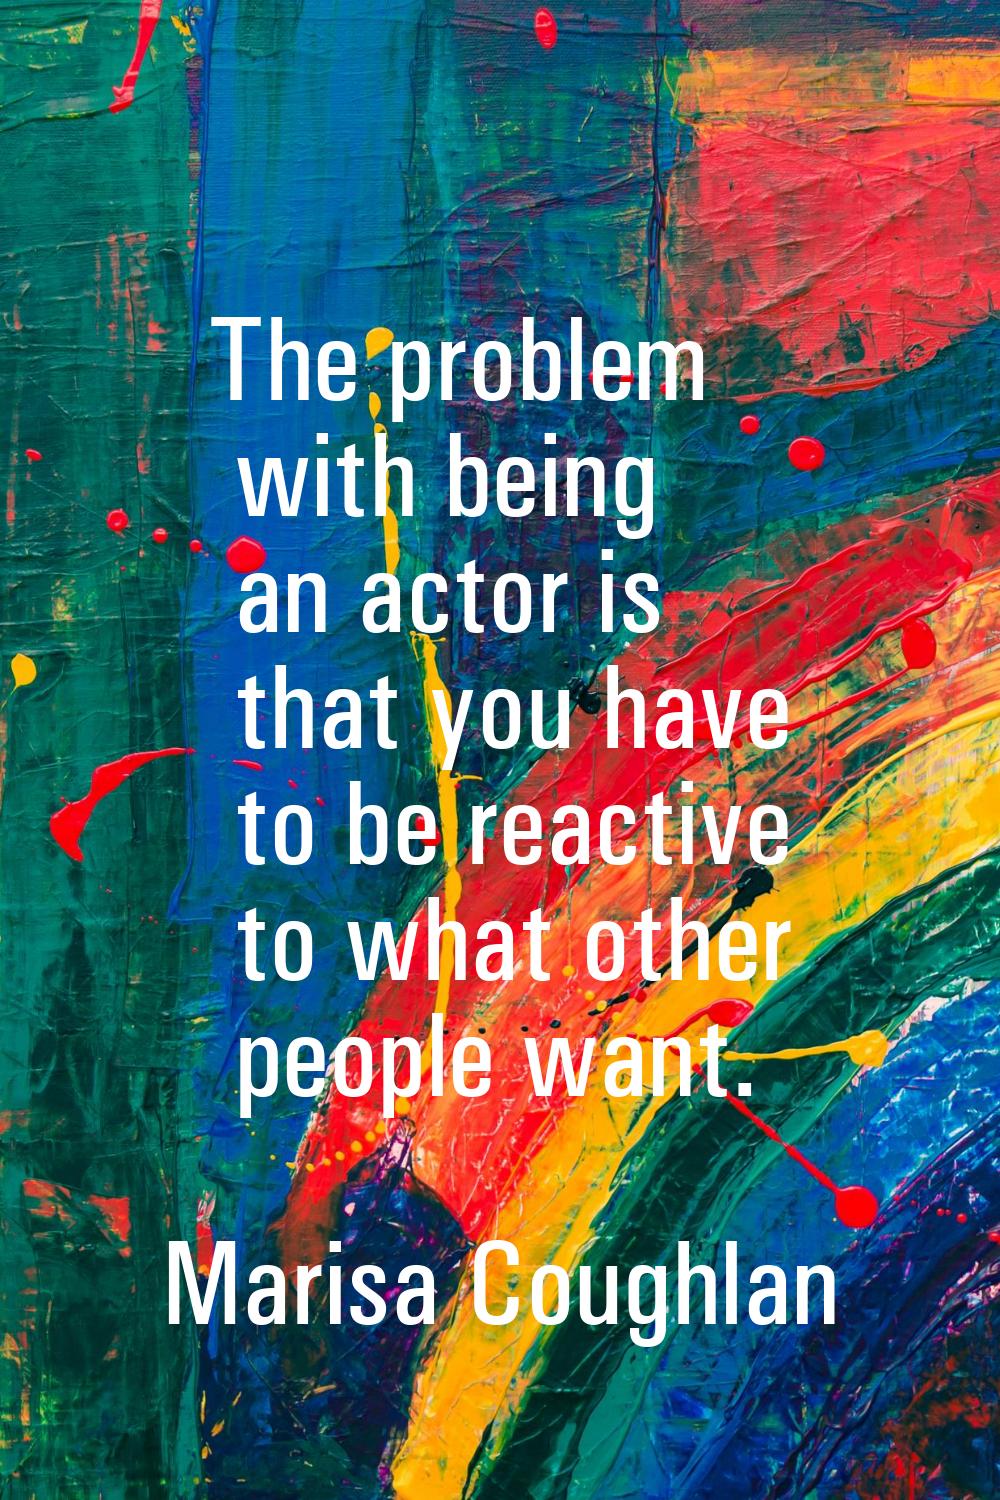 The problem with being an actor is that you have to be reactive to what other people want.